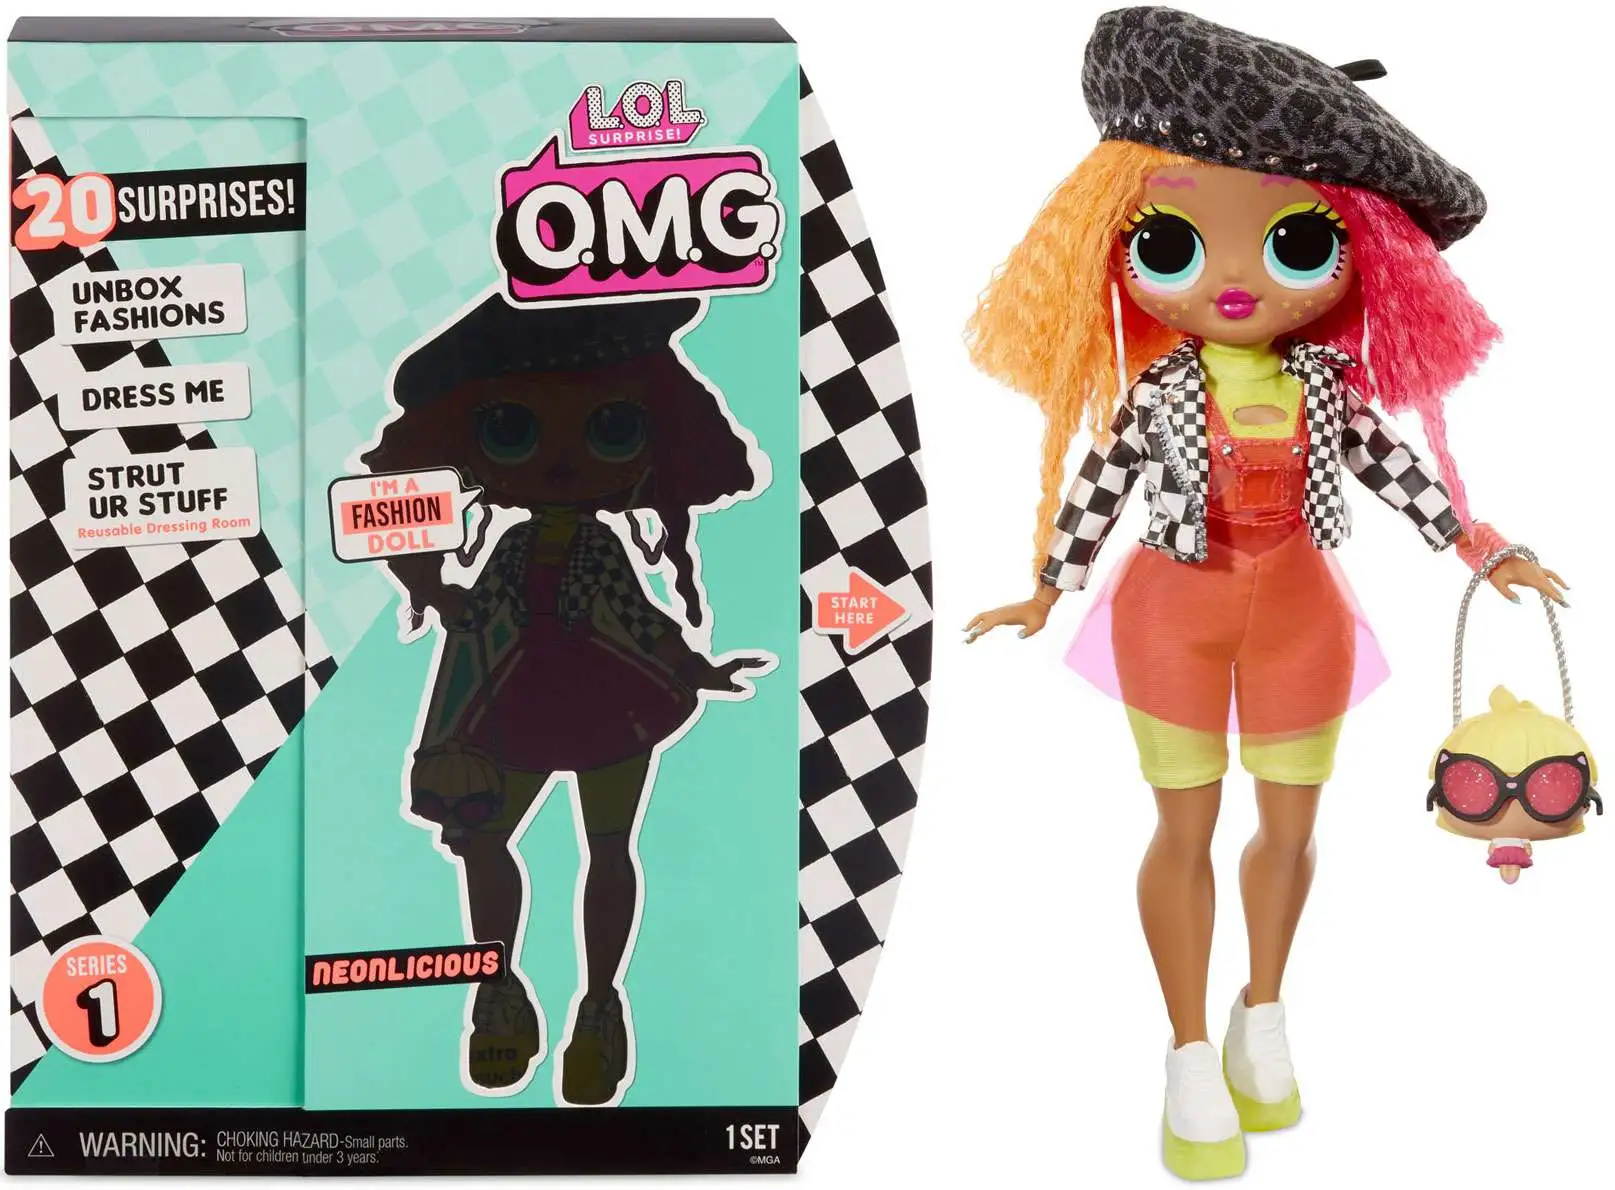 Lol Surprise! Dolls: the surprise package that became 2017's must-have  Christmas toy